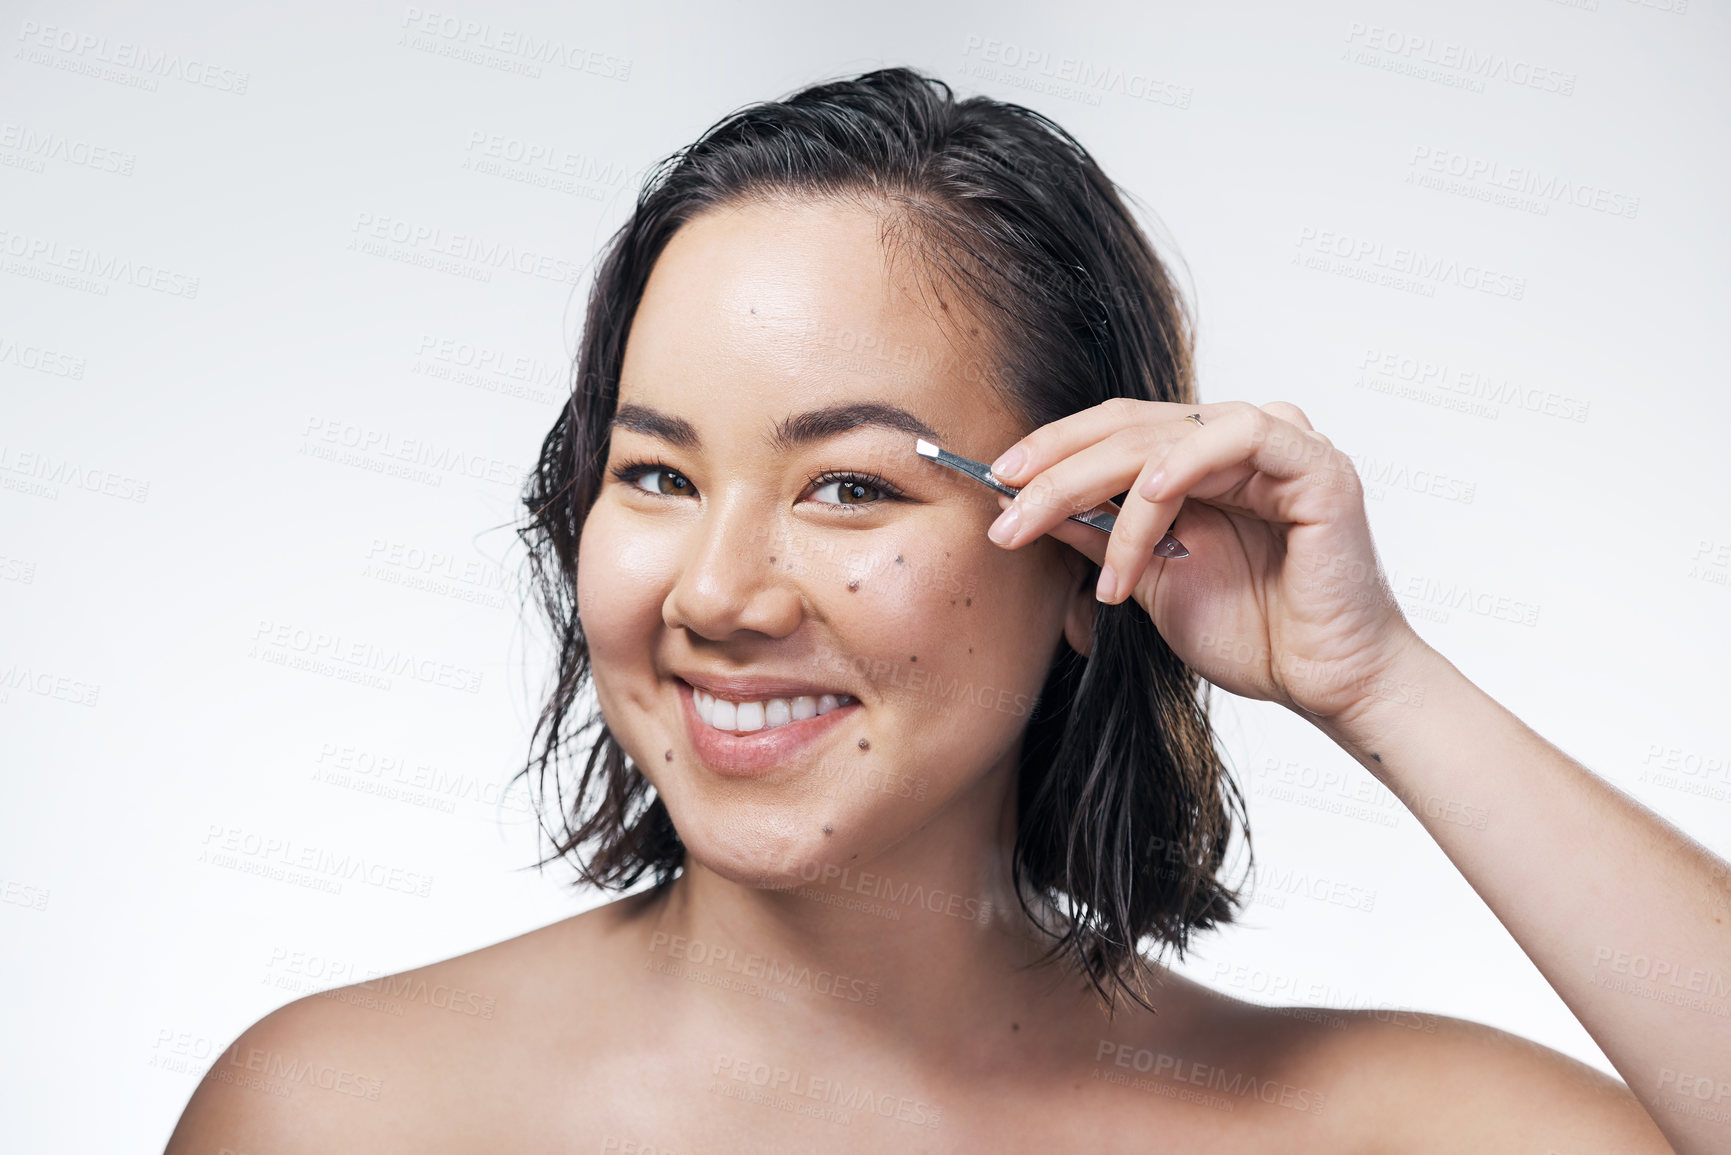 Buy stock photo Cropped shot of a beautiful young woman tweezing her eyebrows